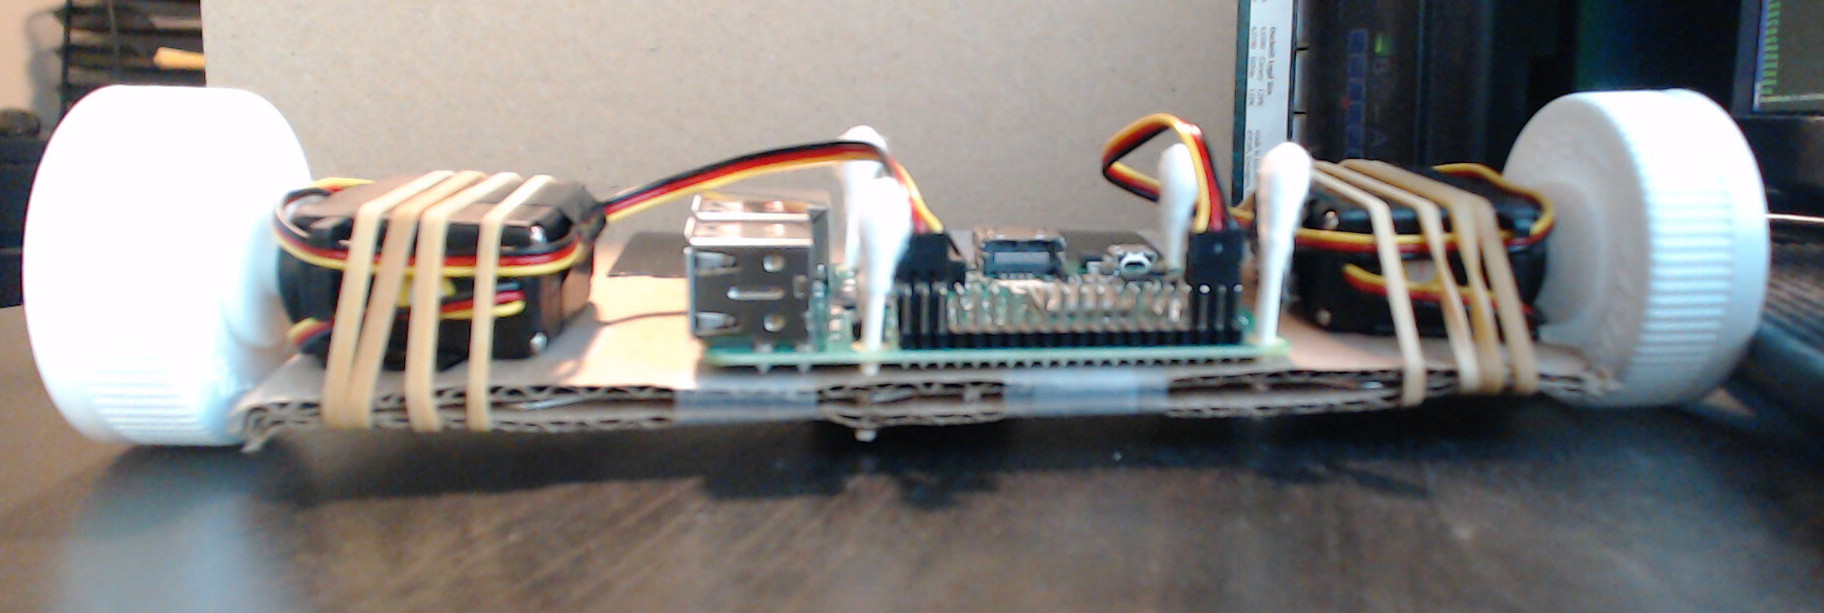 Side view of the robot with Raspberry Pi affixed.